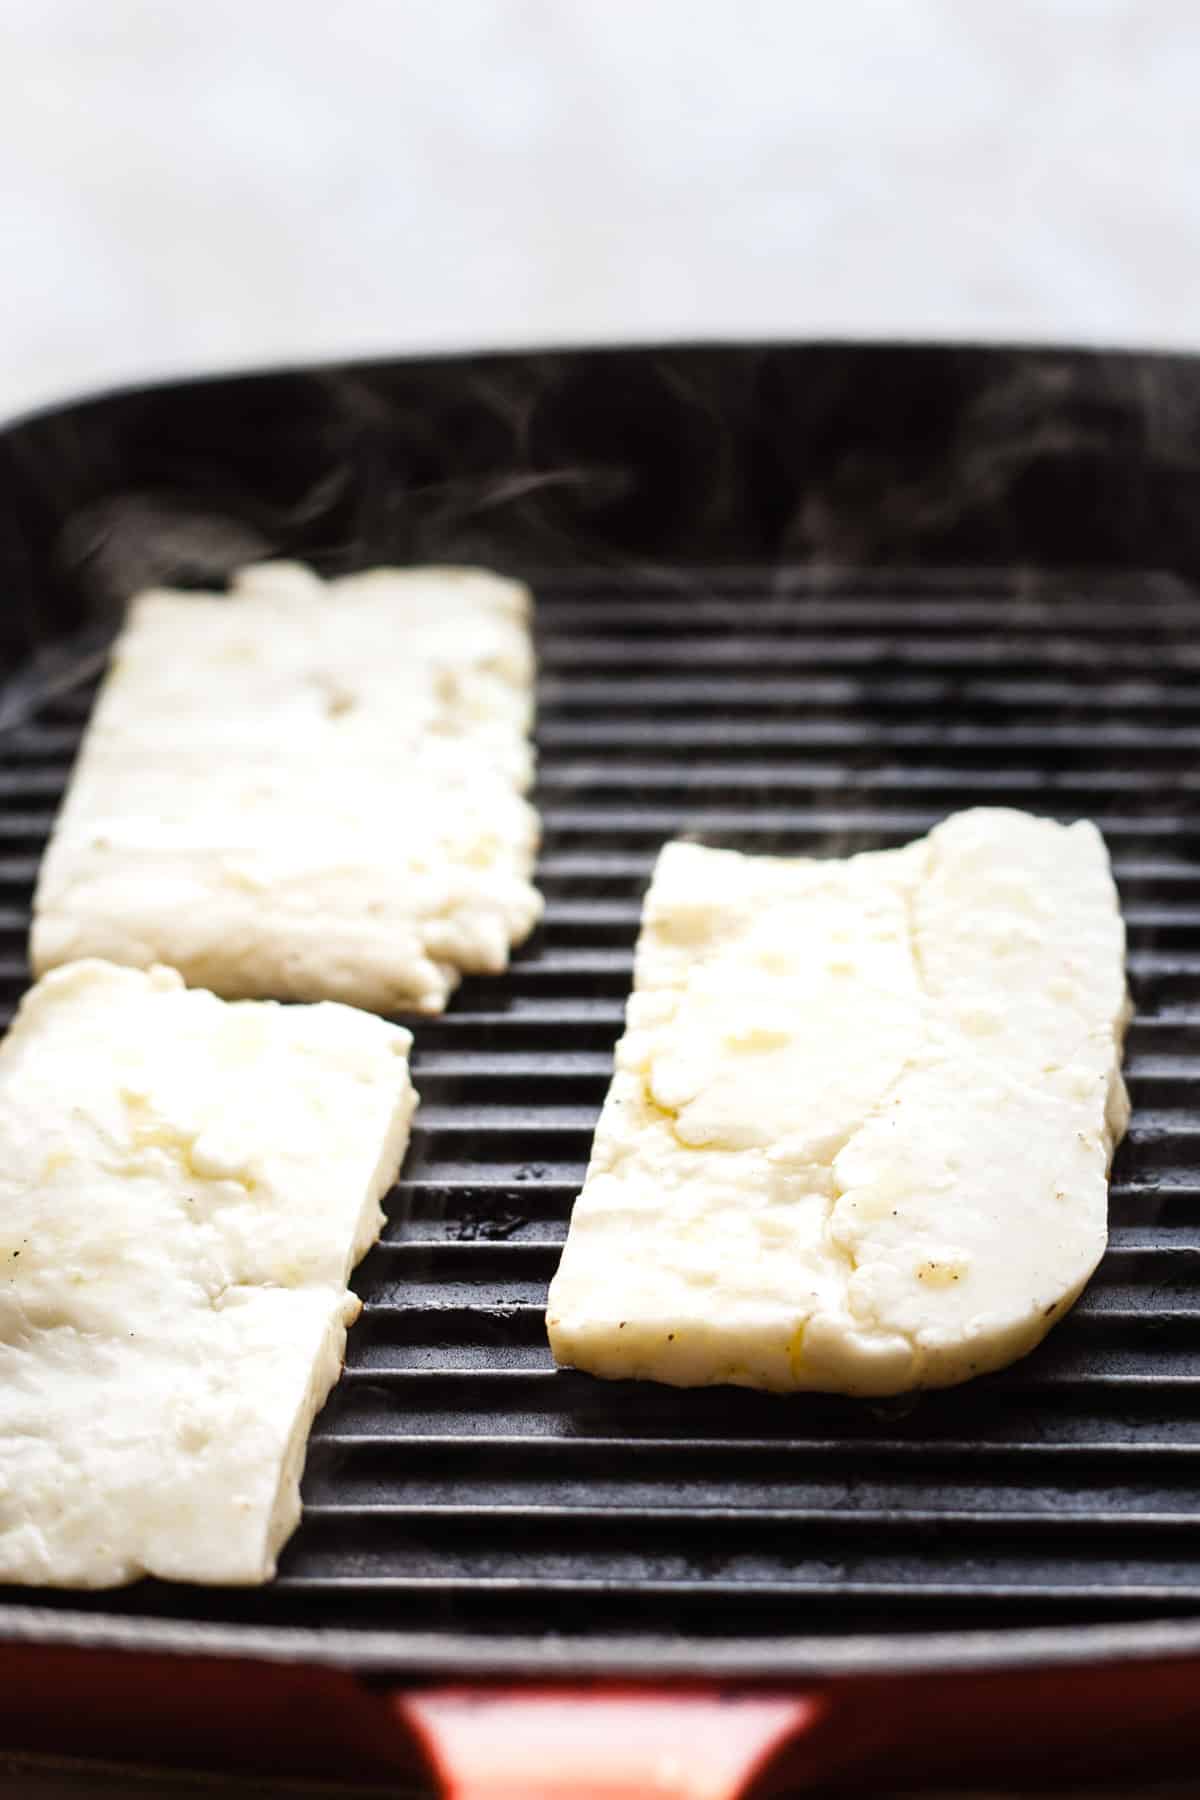 Halloumi cheese in the grilling pan